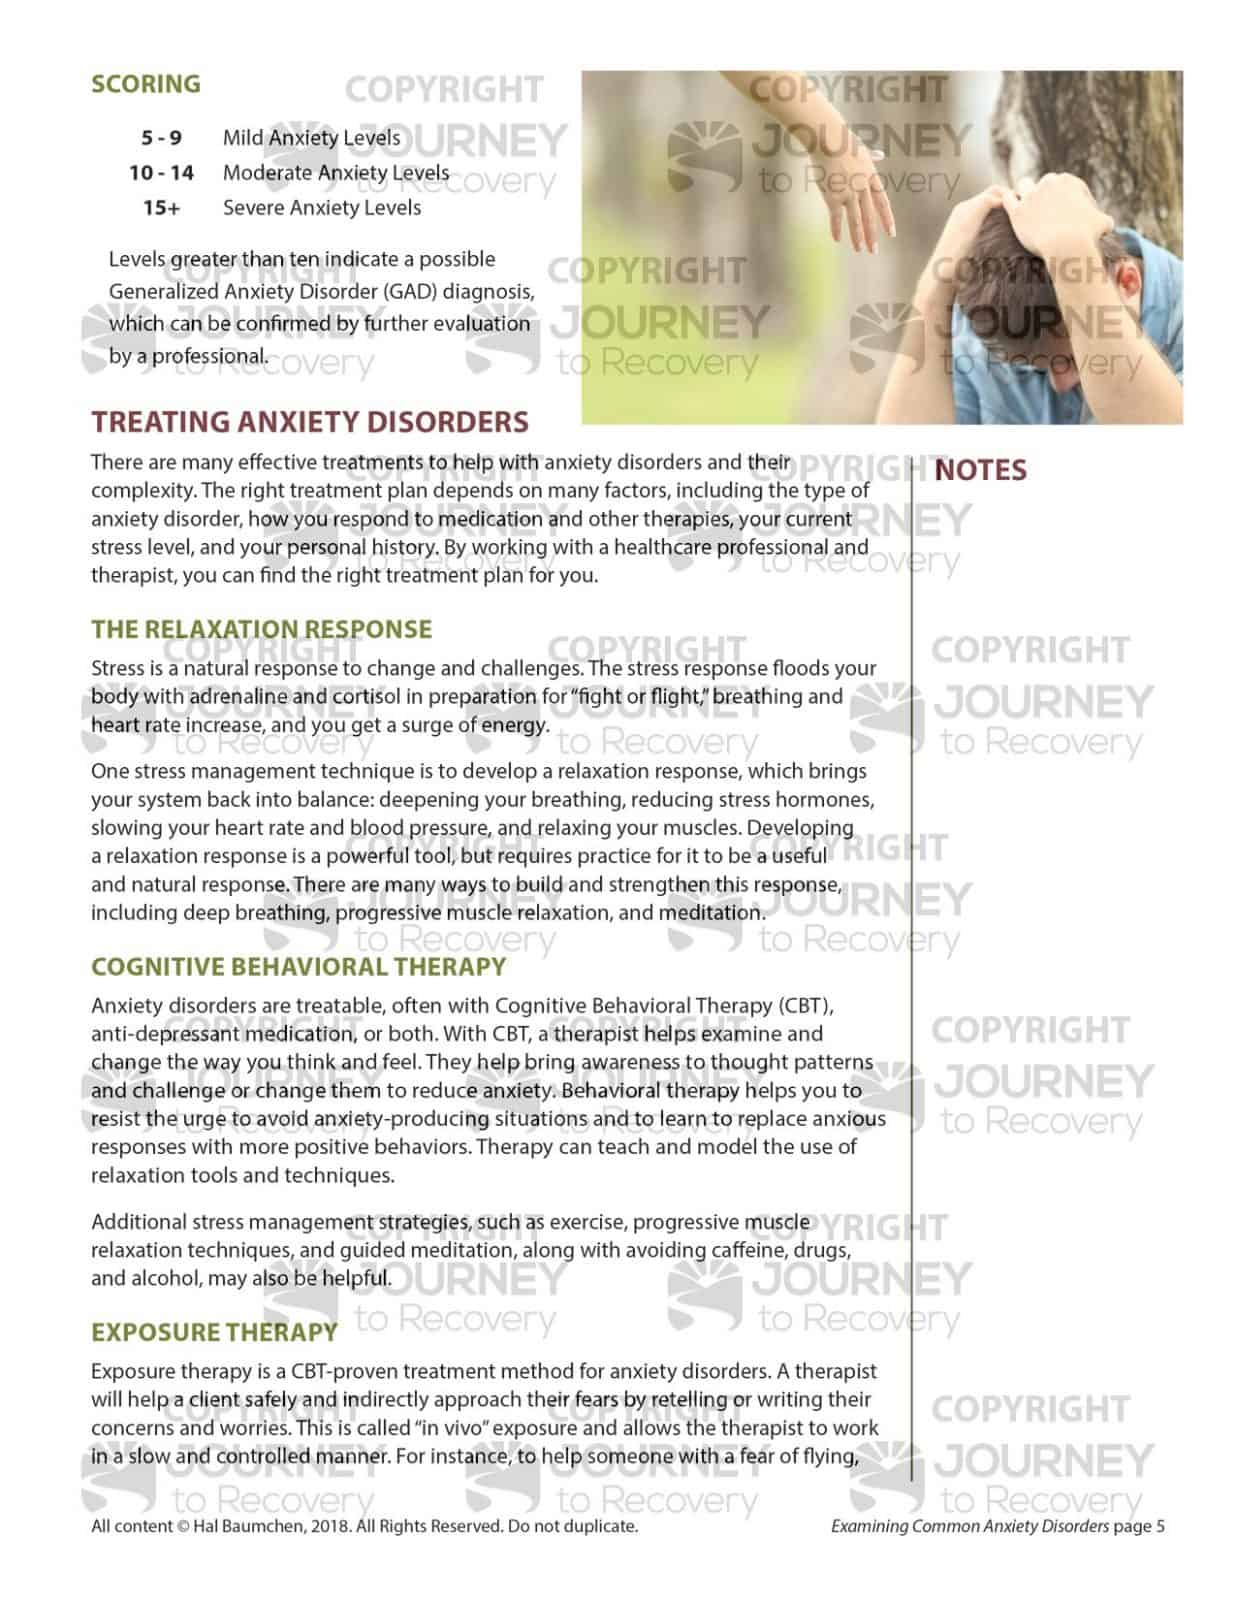 Examining Common Anxiety Disorders (MH Lesson)